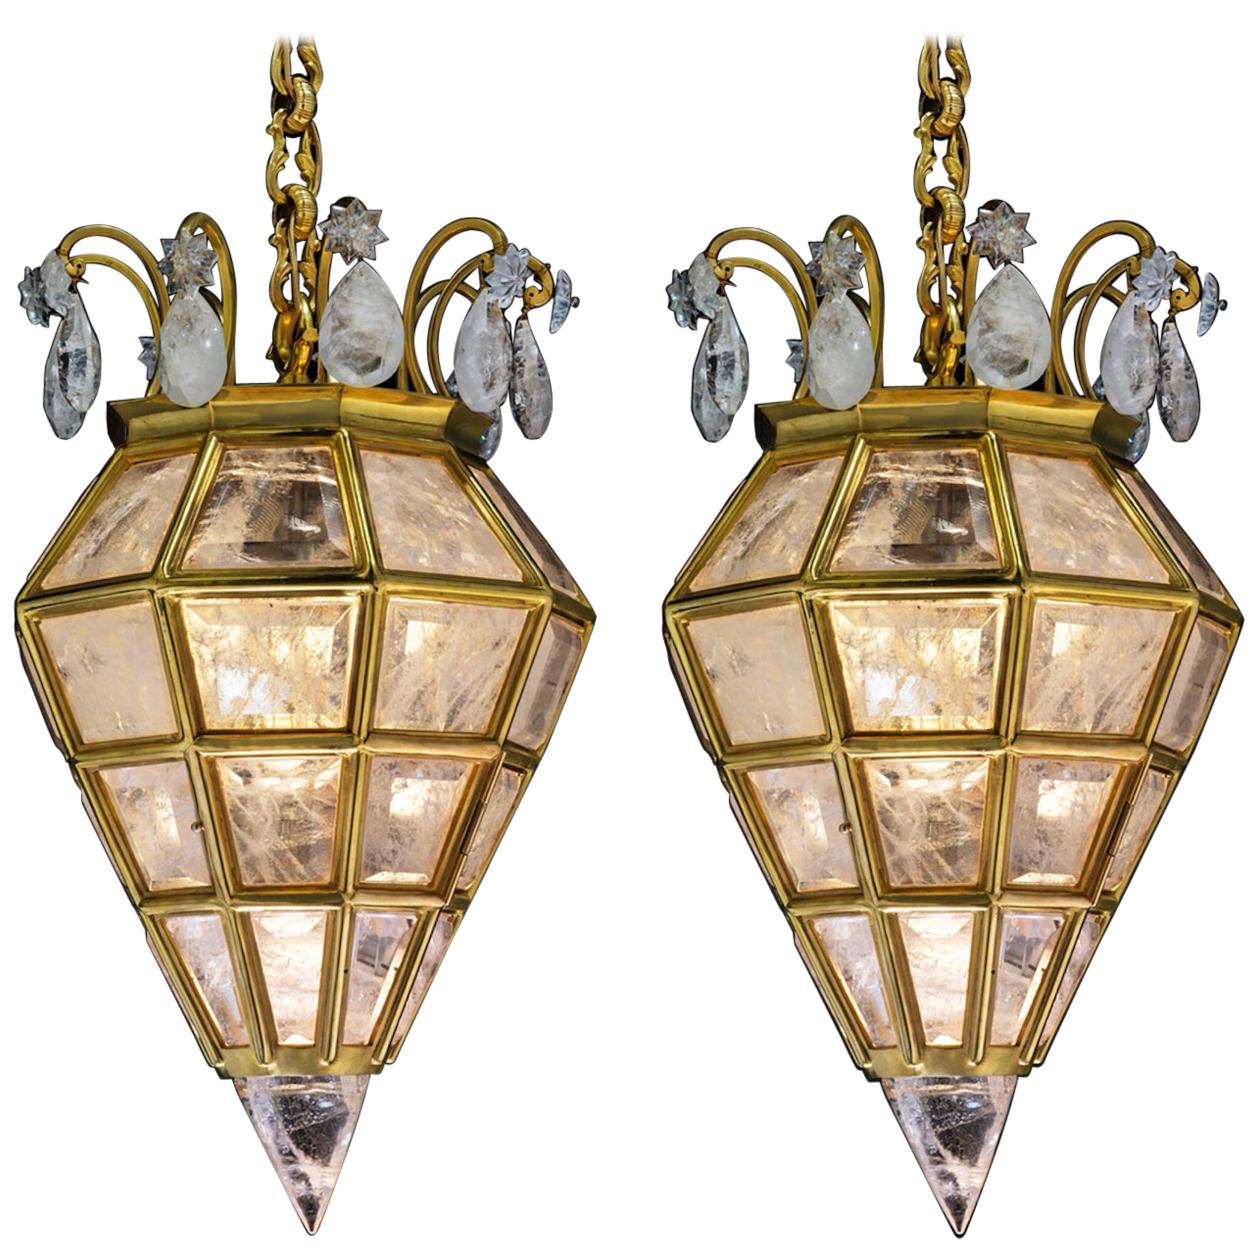 Pair of Rock Crystal Lanterns by Alexandre Vossion